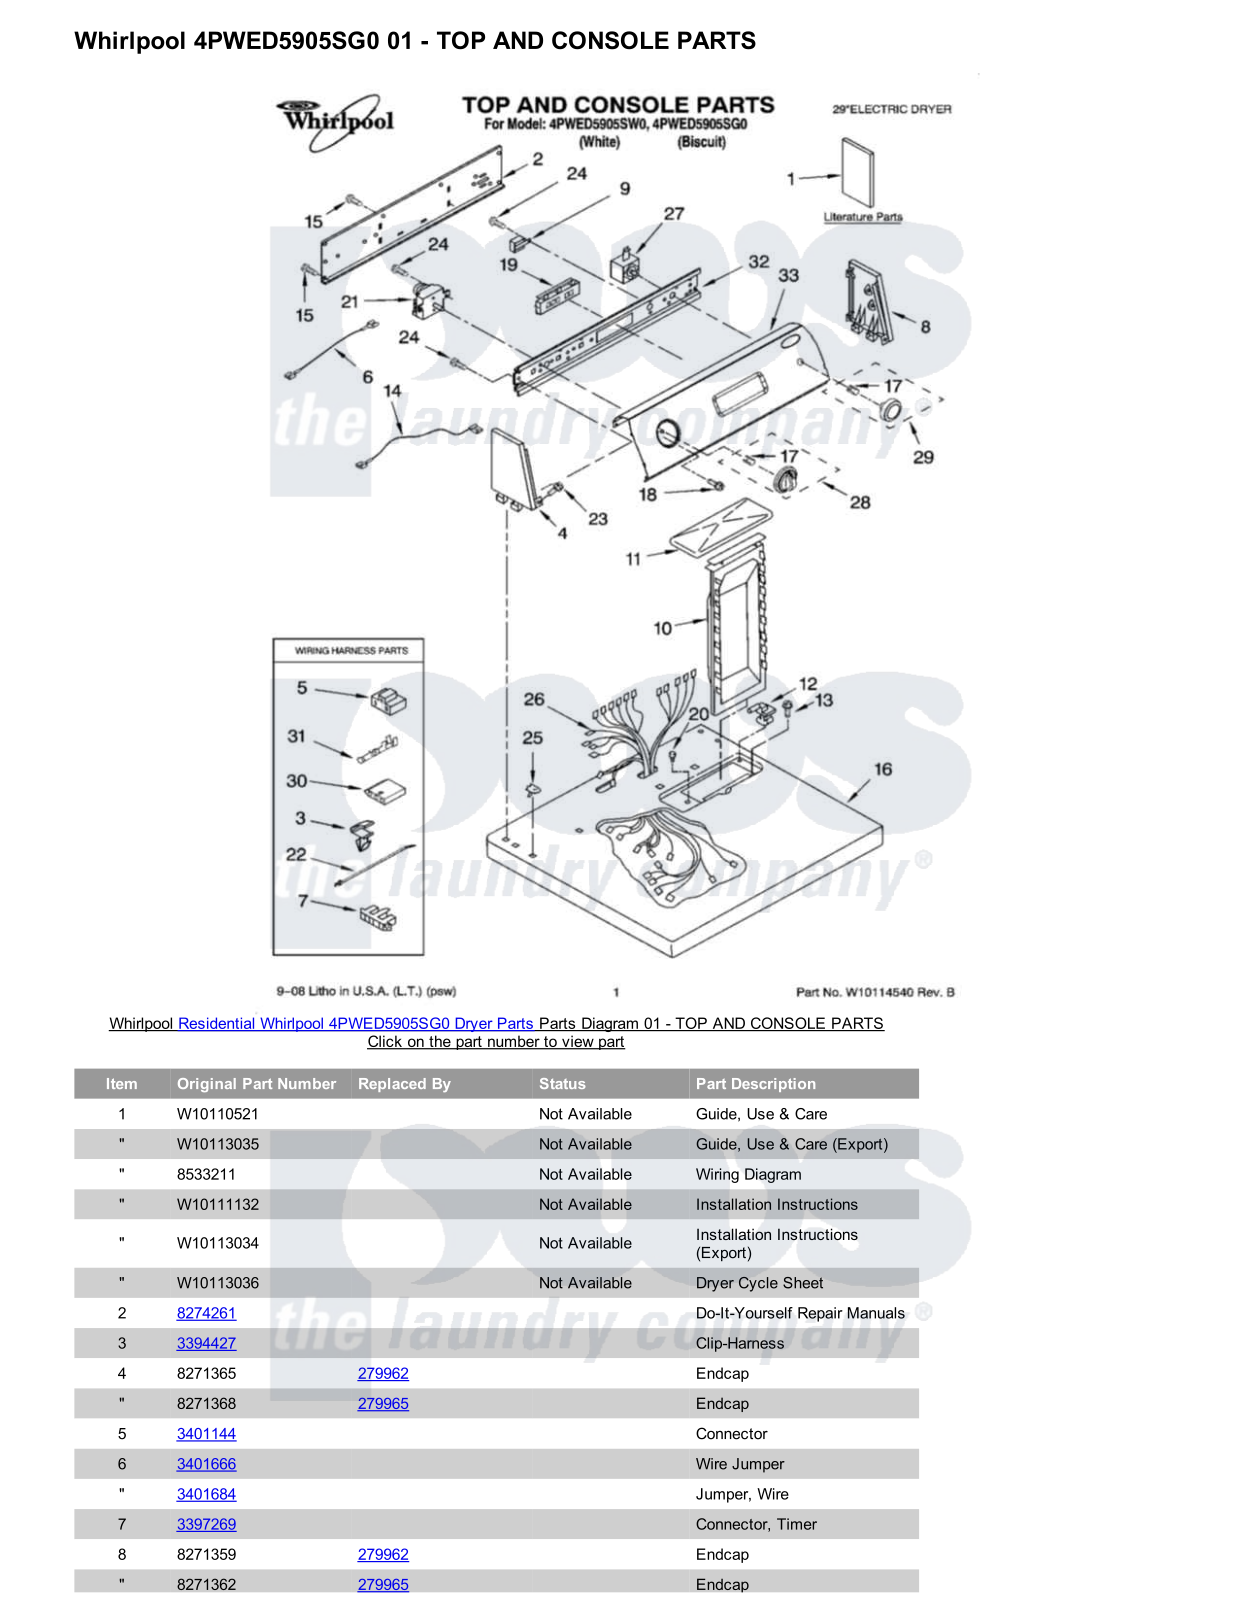 Whirlpool 4PWED5905SG0 Parts Diagram